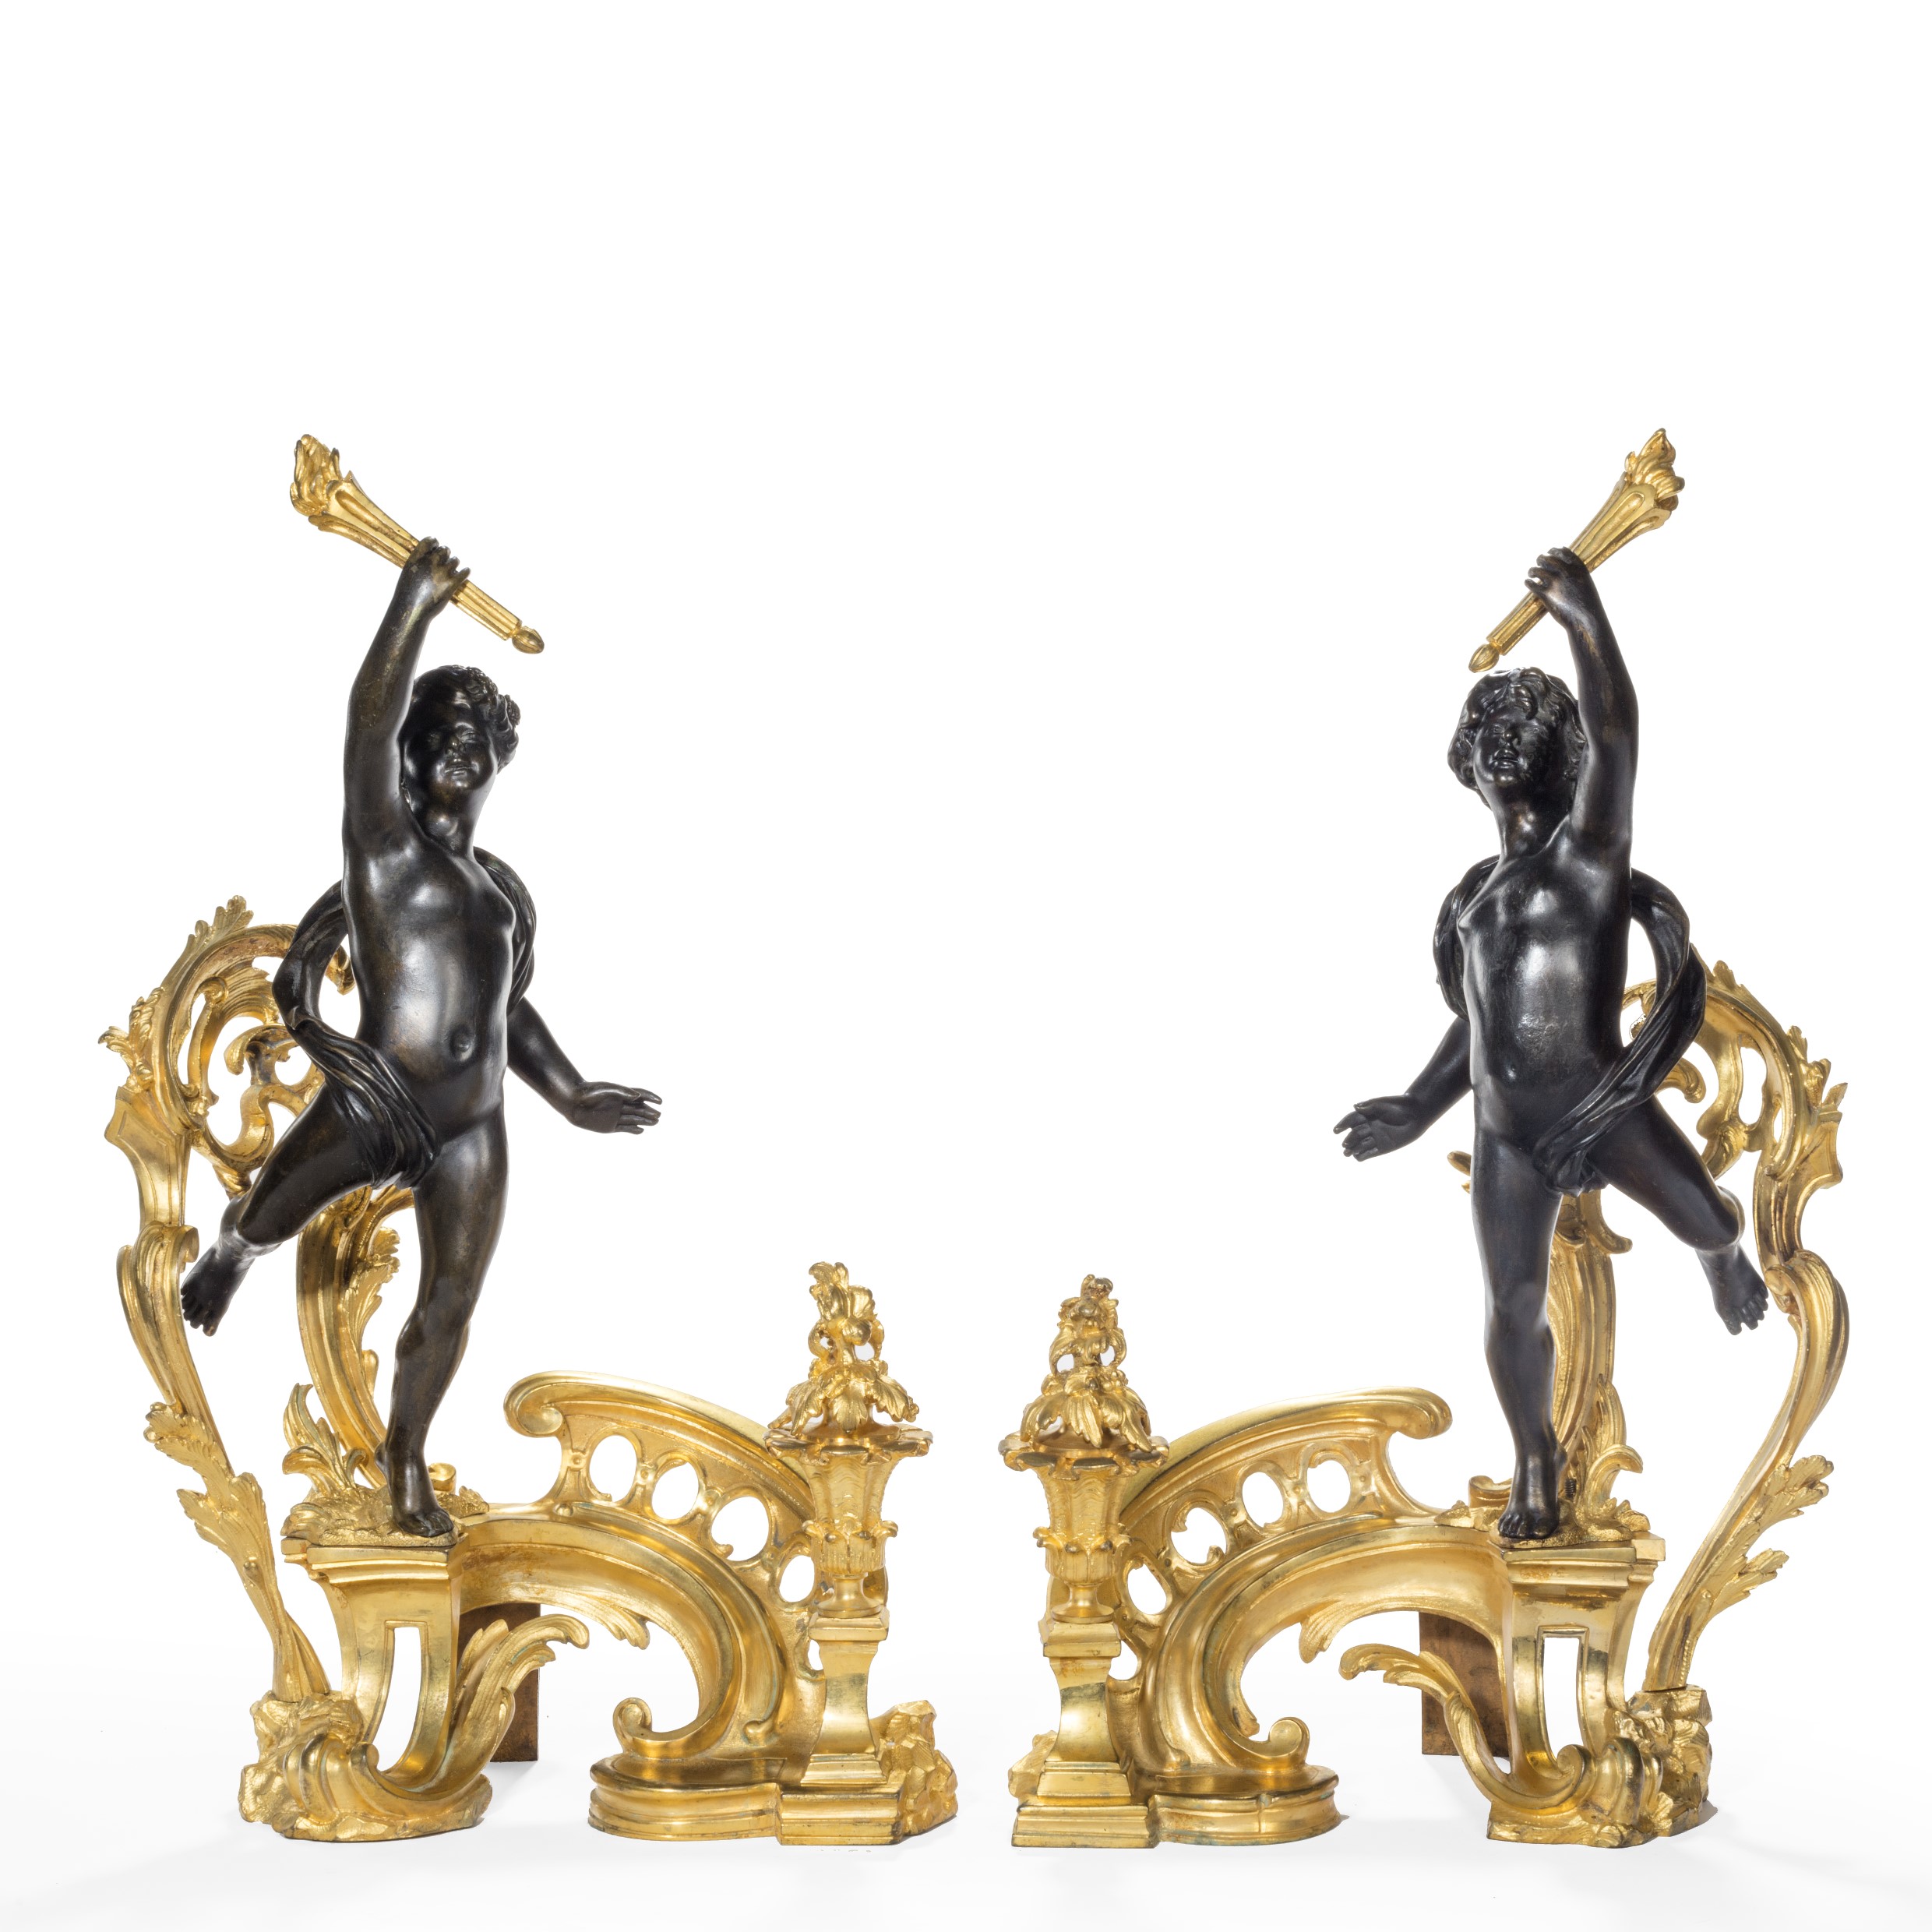 A pair of late 19th century ormolu and bronze chenets